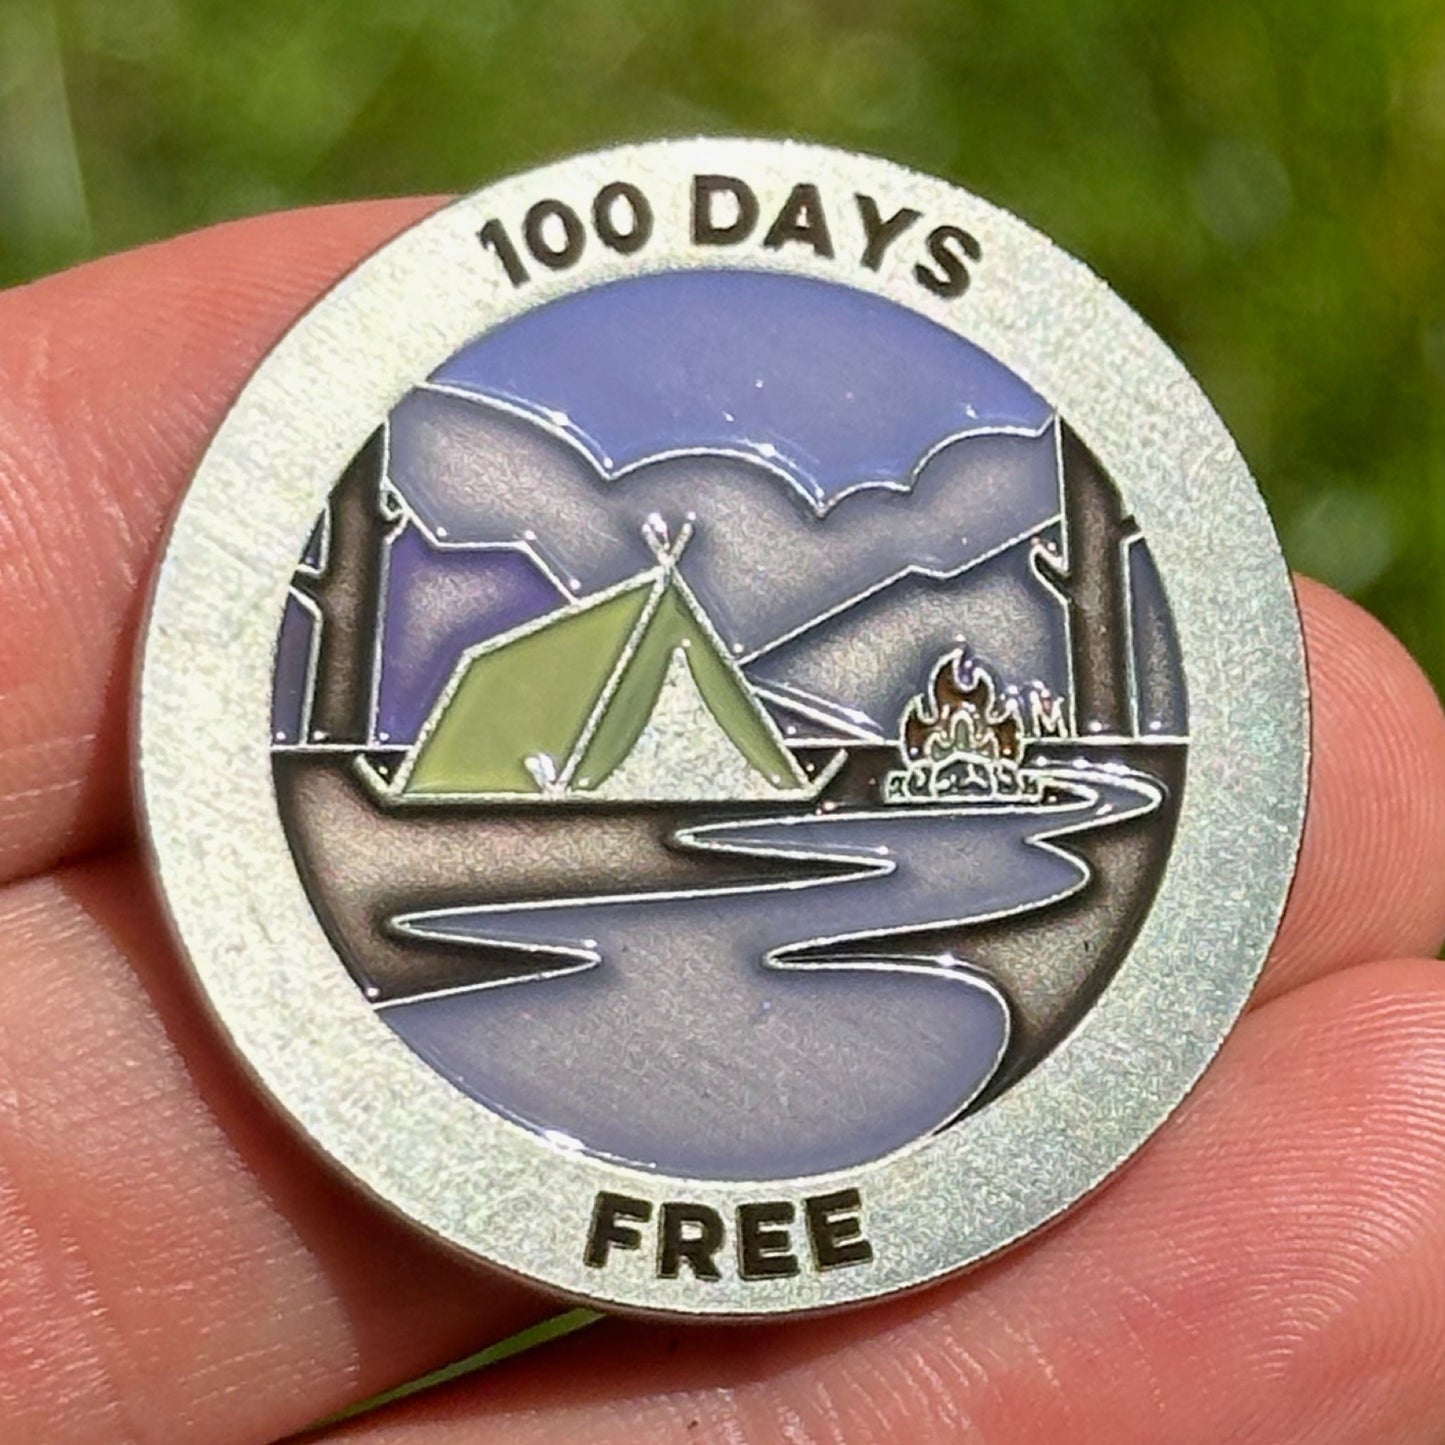 Personalized Color Campground coin - The Achieve Mint